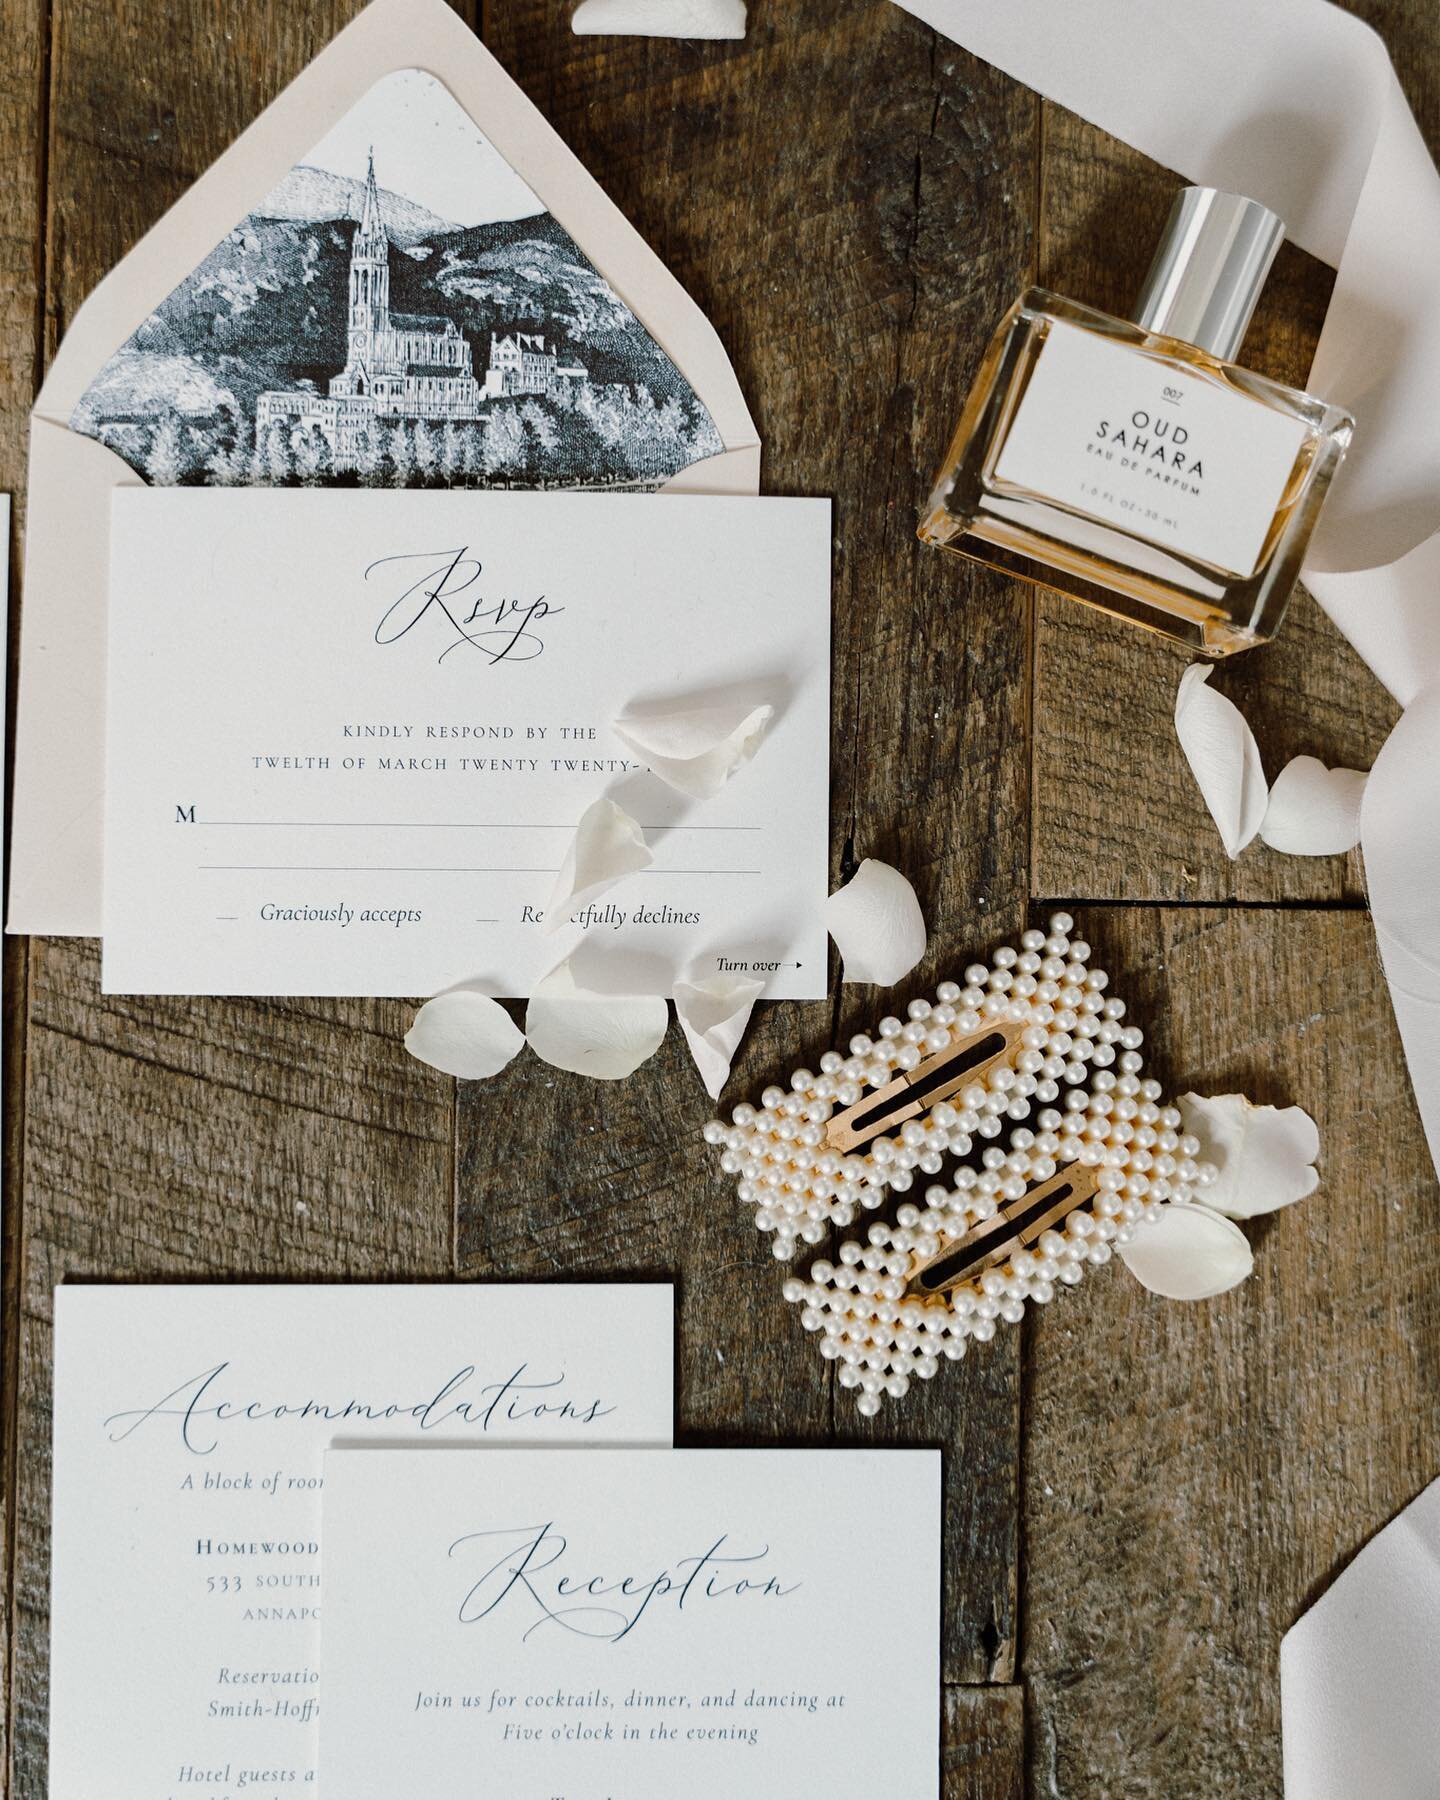 This is your reminder to put all your wedding details in a box the night before! Aside from the typical invitation suite and jewelry, here are some of my favorite flatlay additions I&rsquo;ve seen: 

- hair accessories
- perfume / cologne 
- vow book